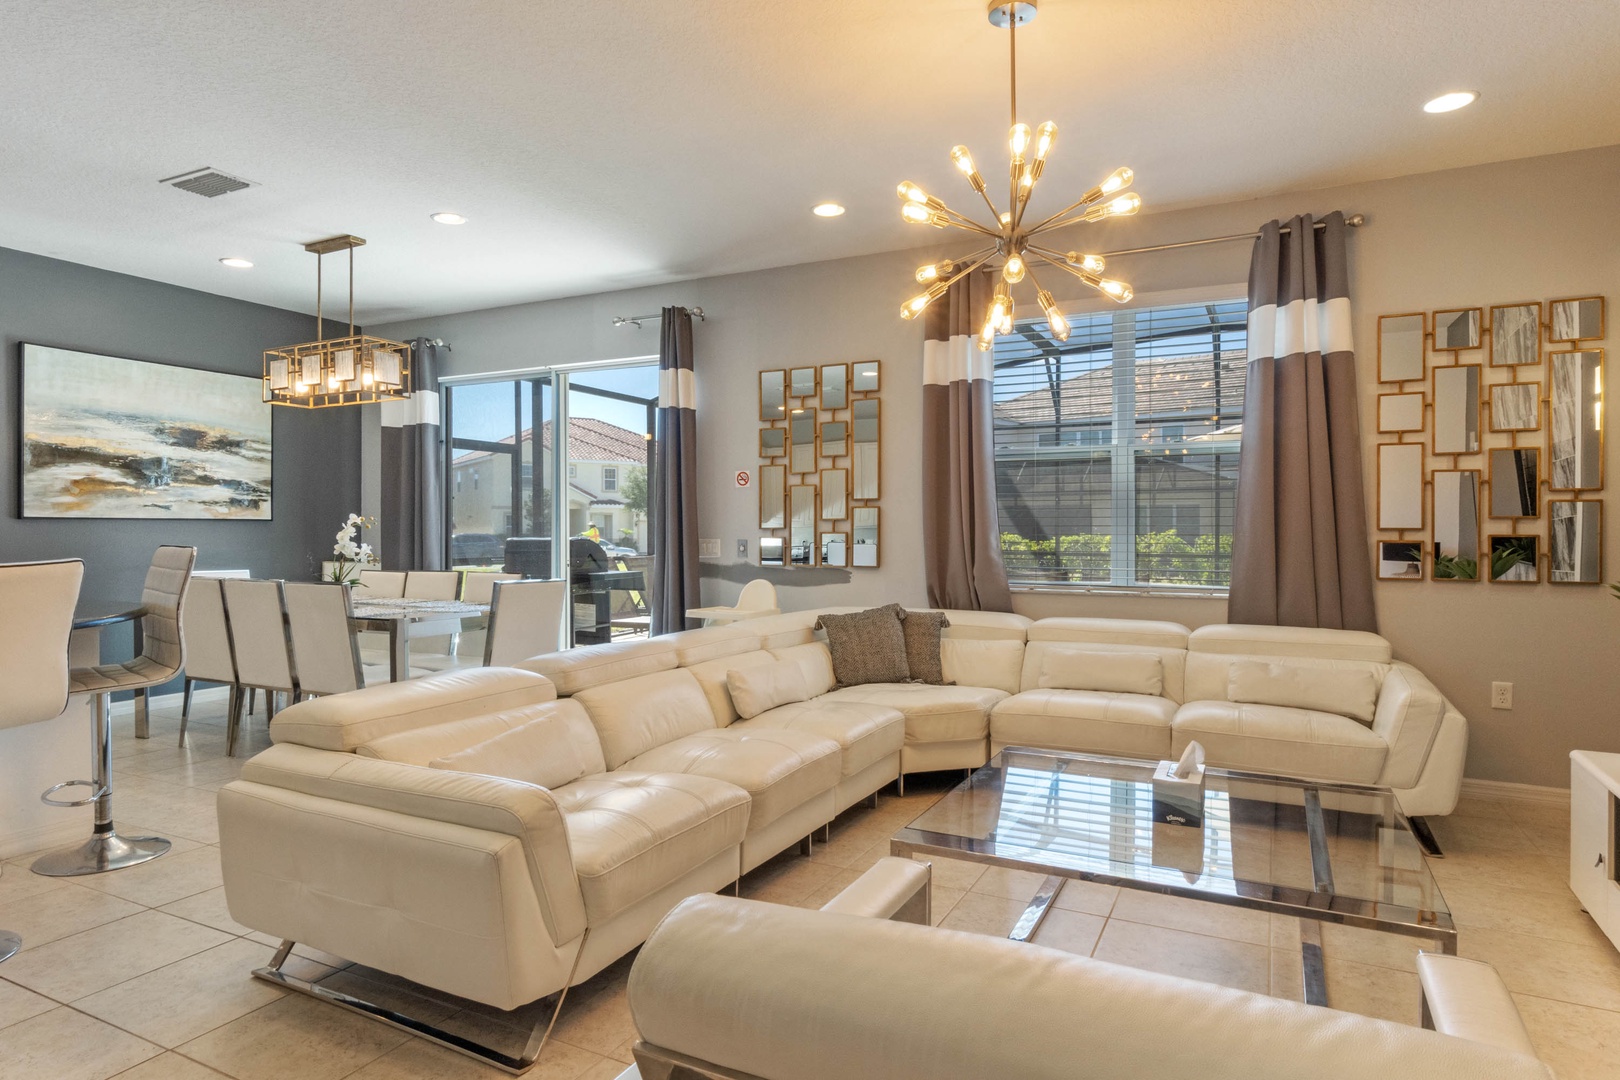 Open living space with large sectional